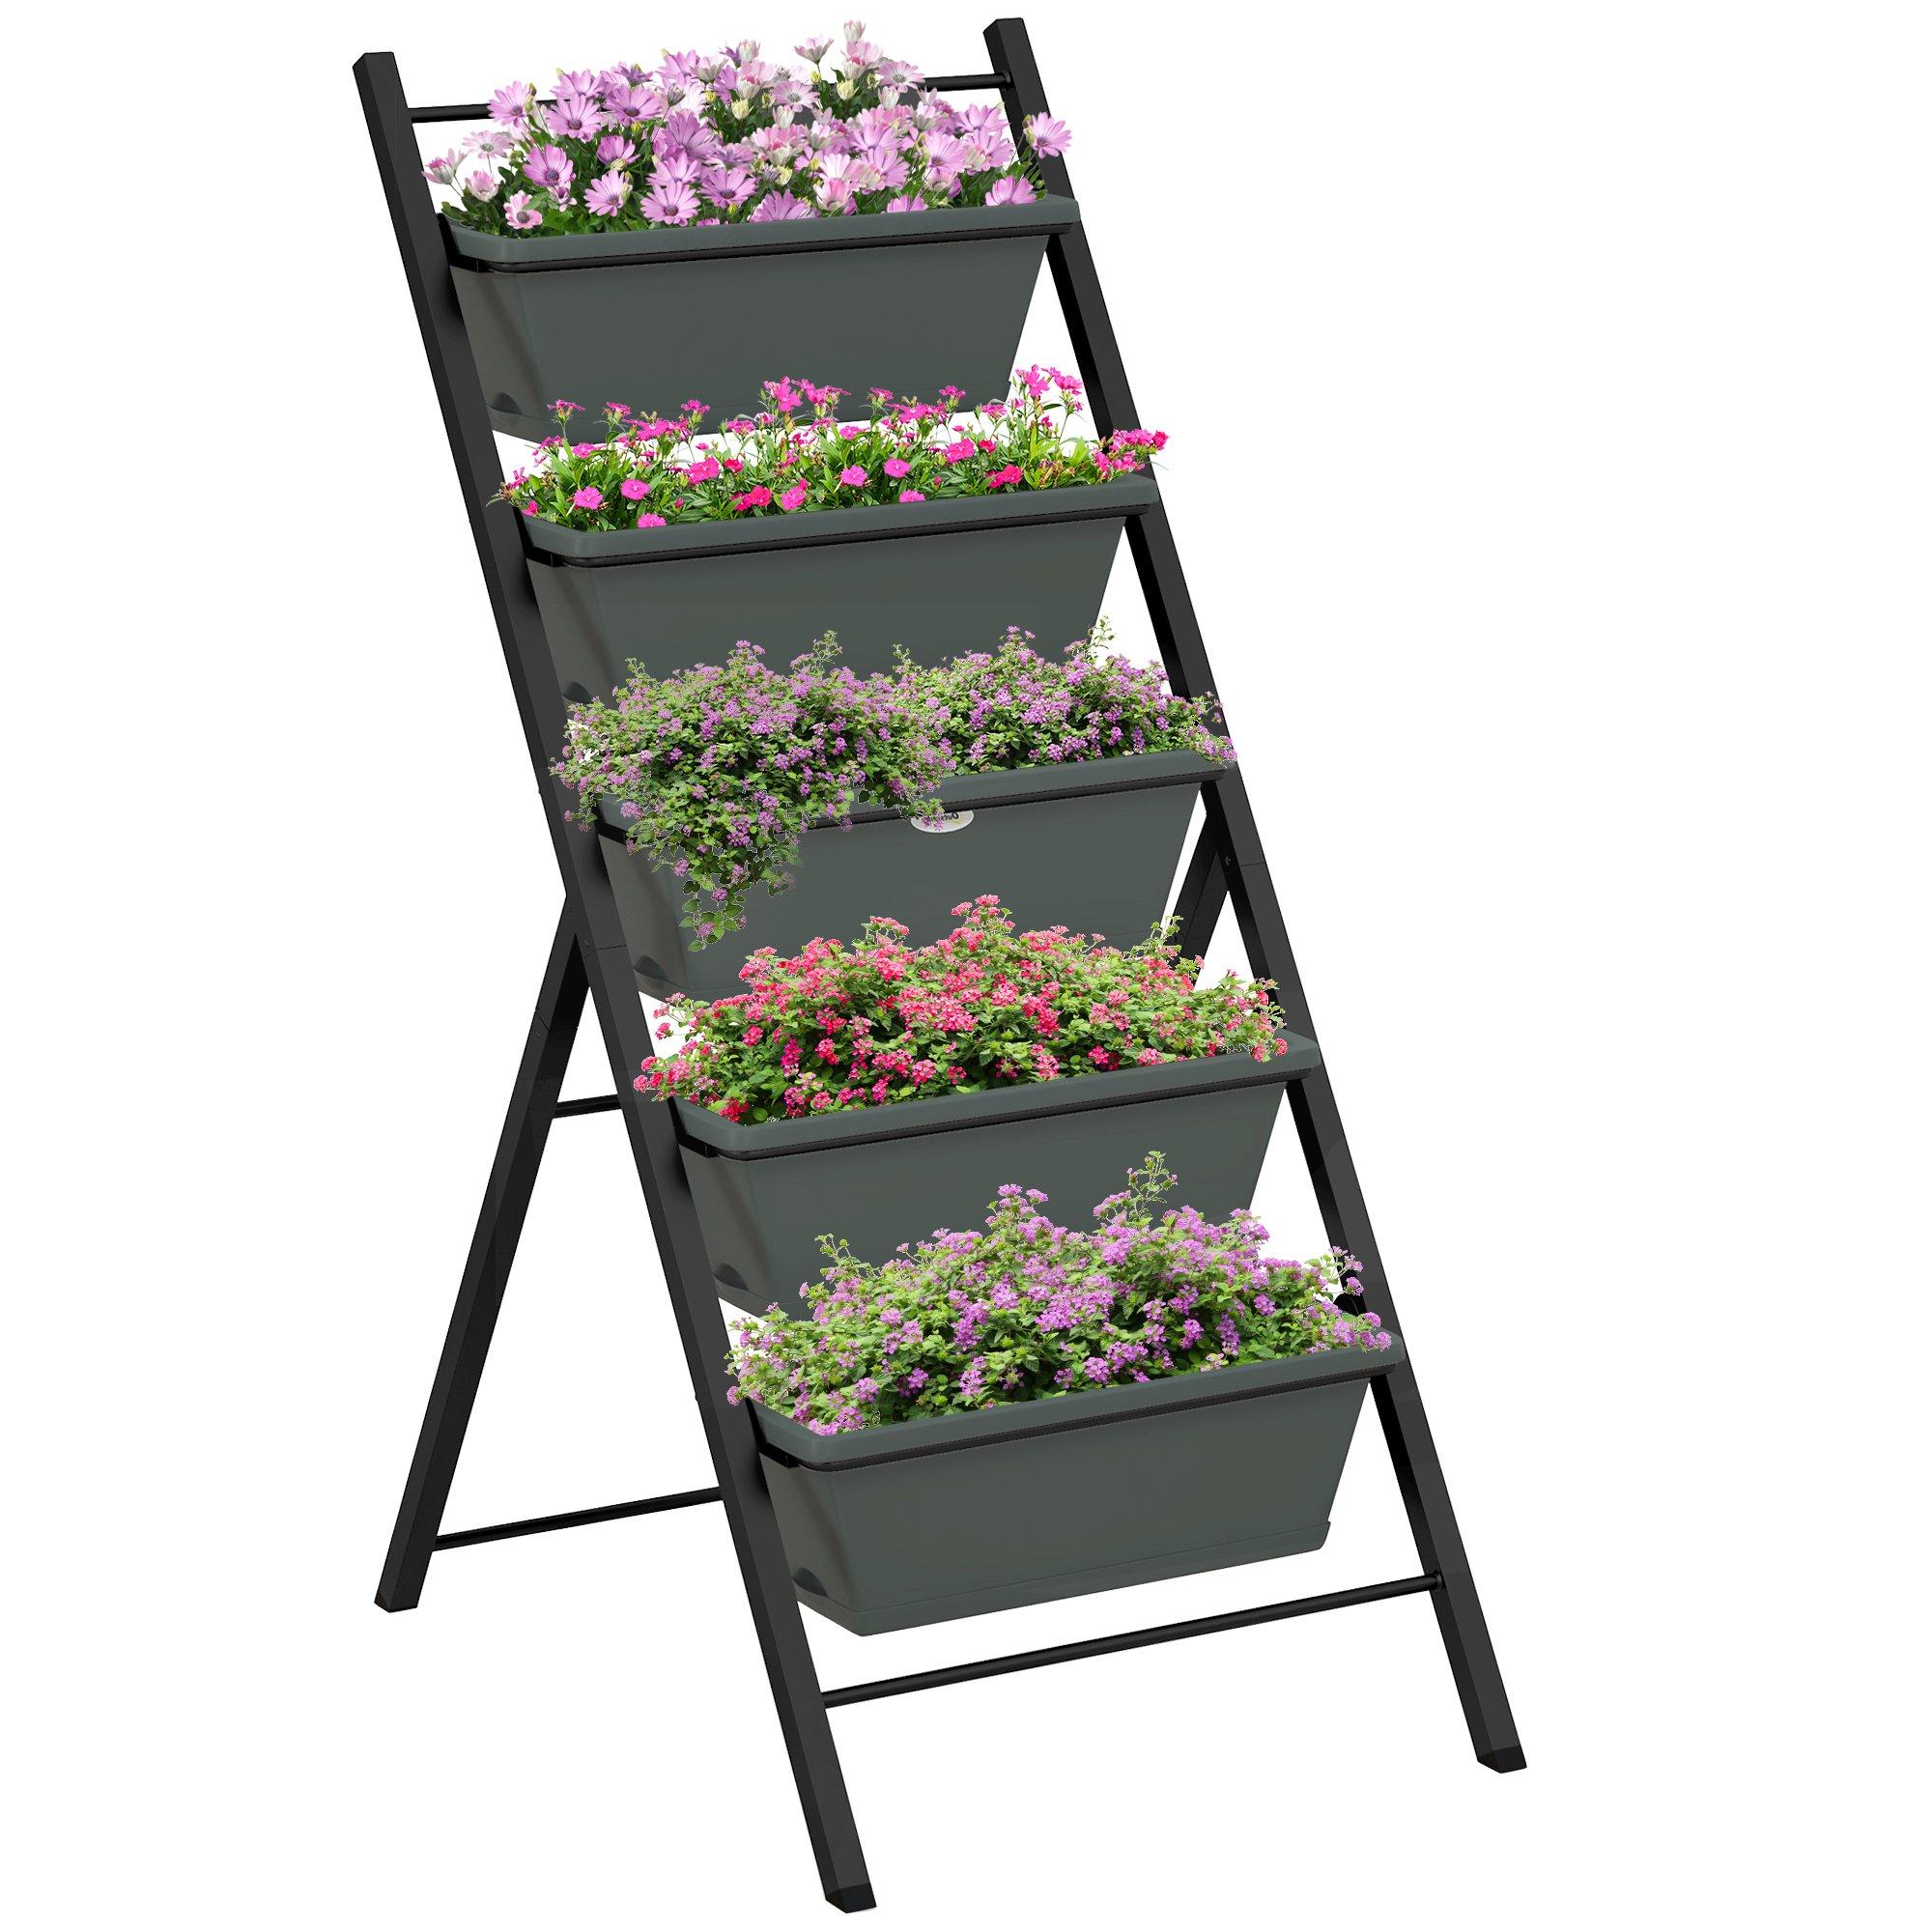 Elevated Plant Stand with 5 Removable Tray Bed for Vegetable Flowers Herbs